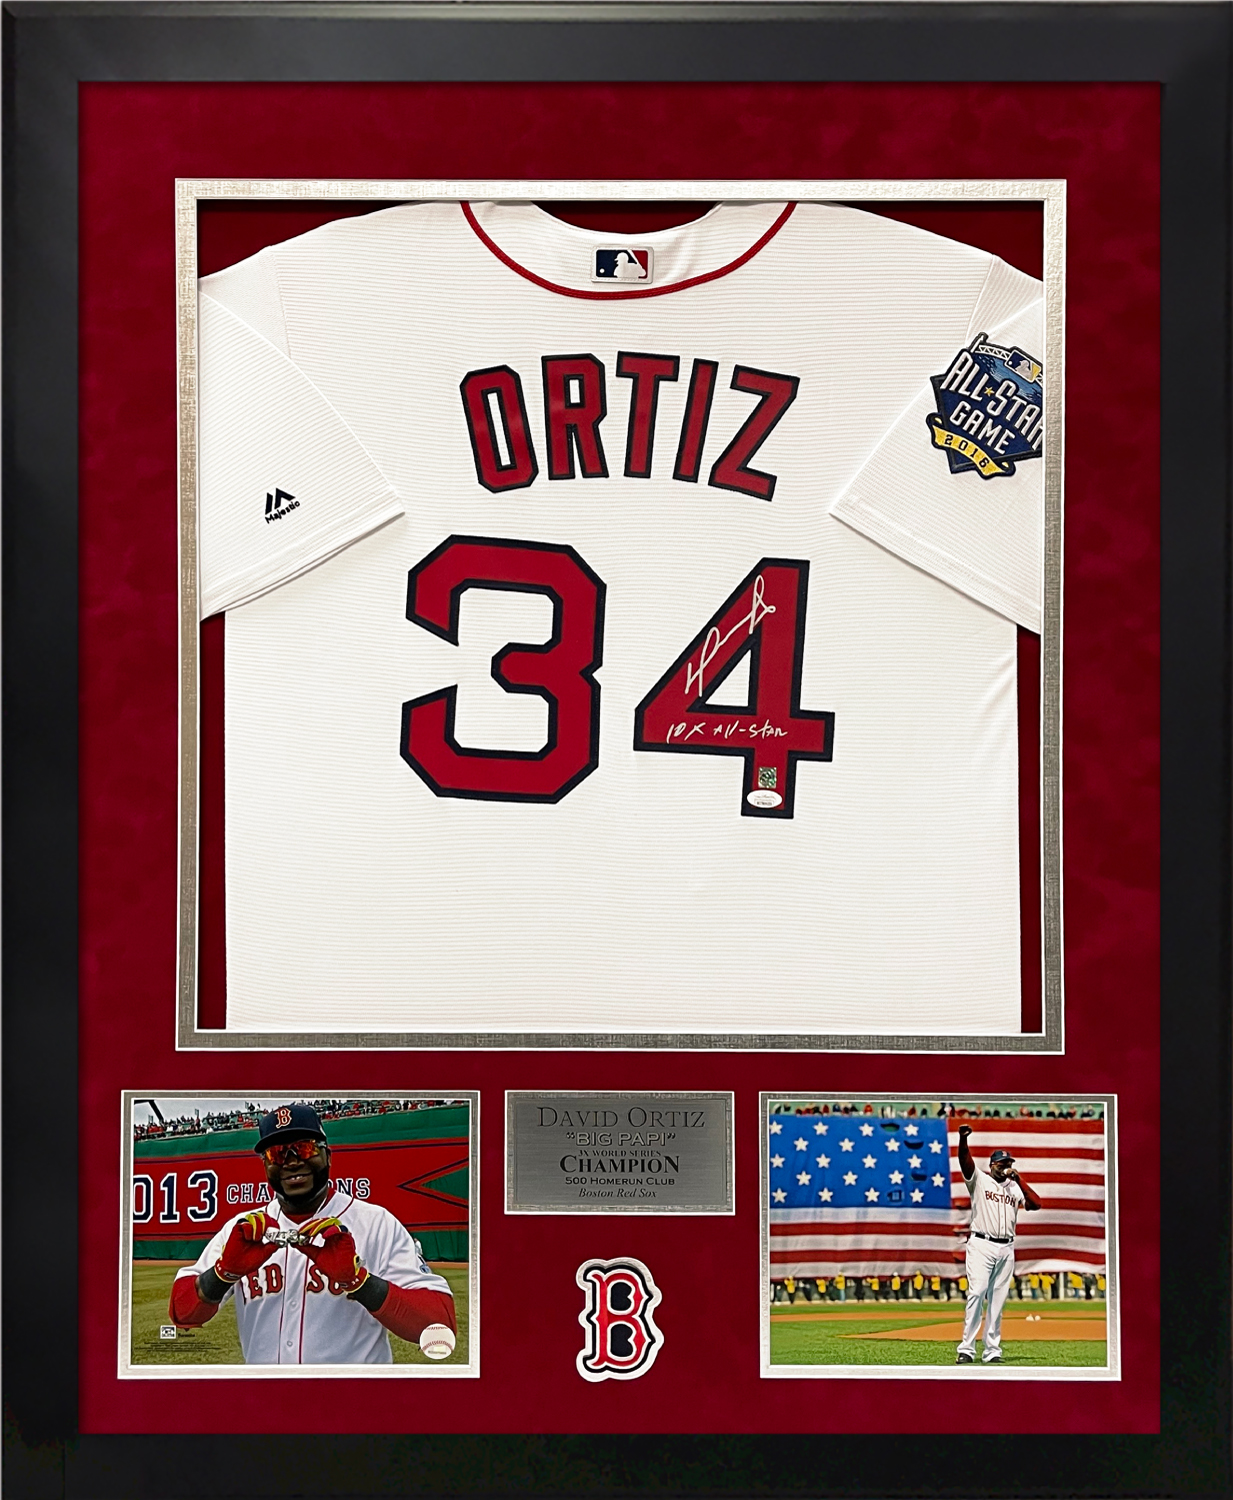 David Ortiz Autograph Jersey White All Star Game 2016 with Inscription 10x  All Star Framed 37x45